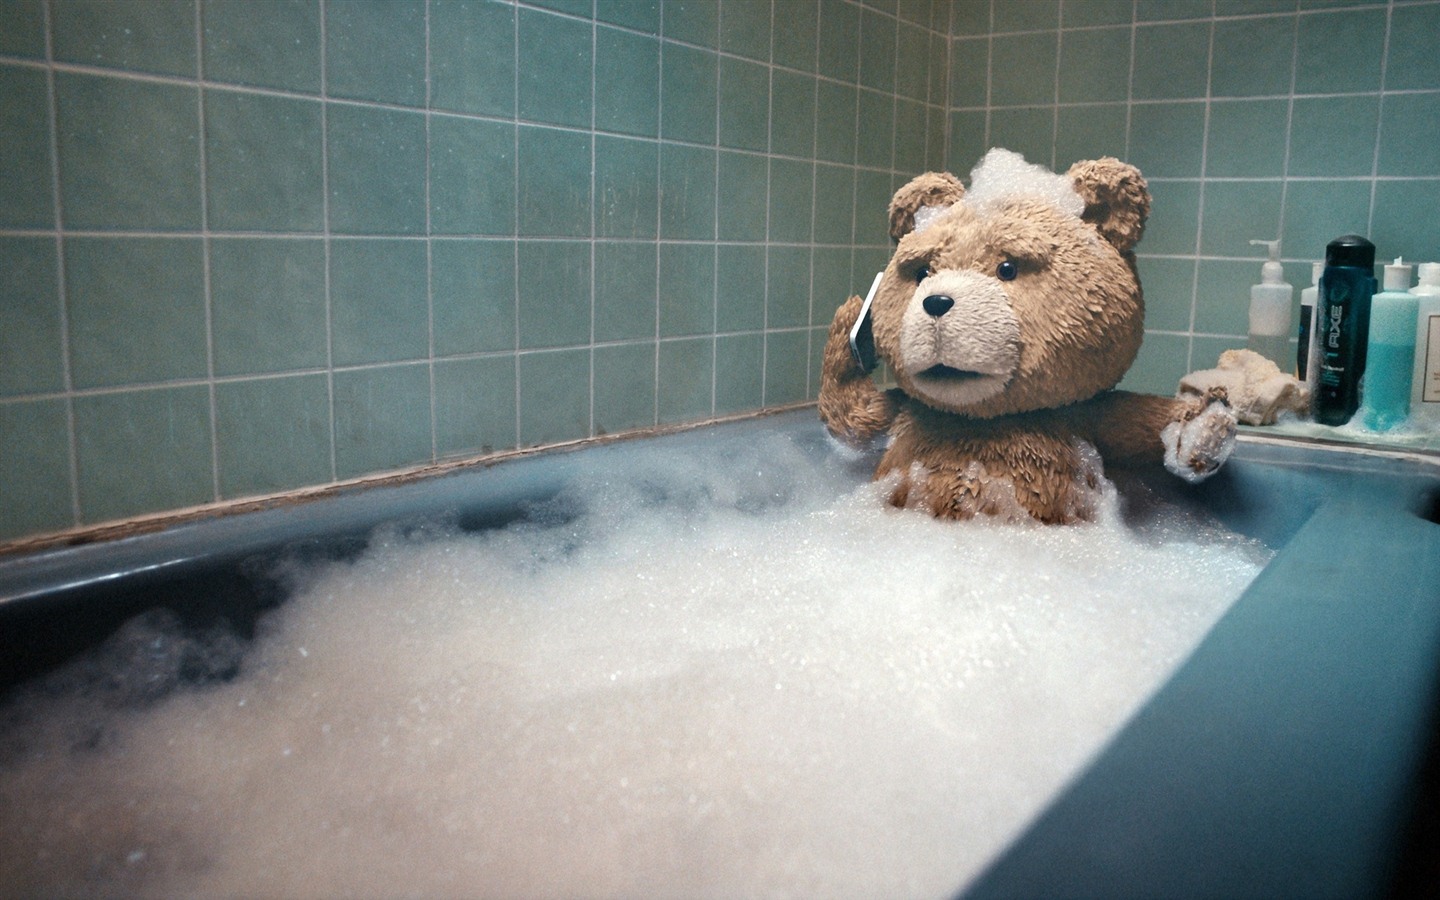 Ted 2012 HD movie wallpapers #2 - 1440x900